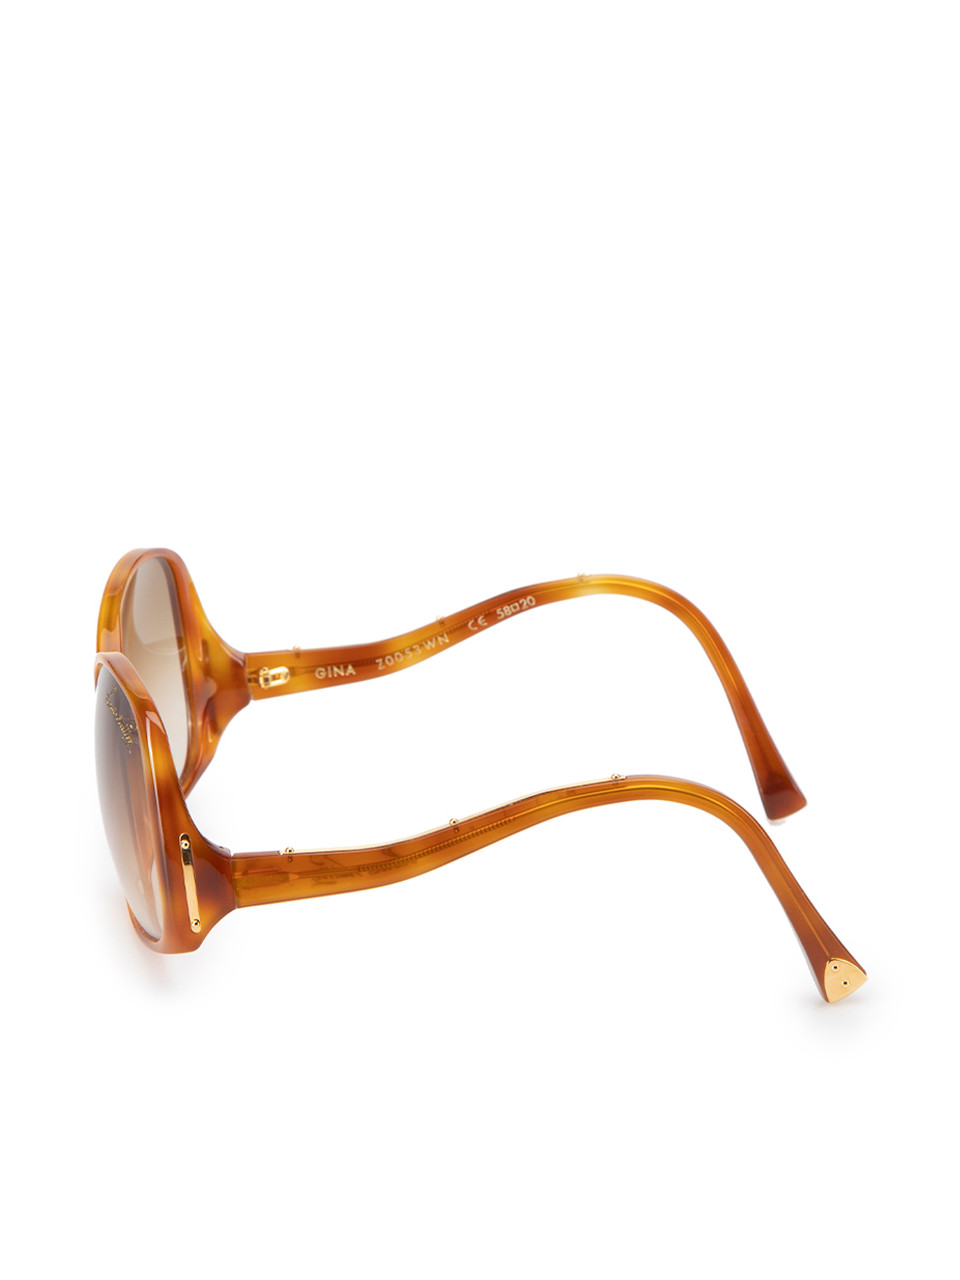 Louis Vuitton Brown Gina Oversized Square Sunglasses